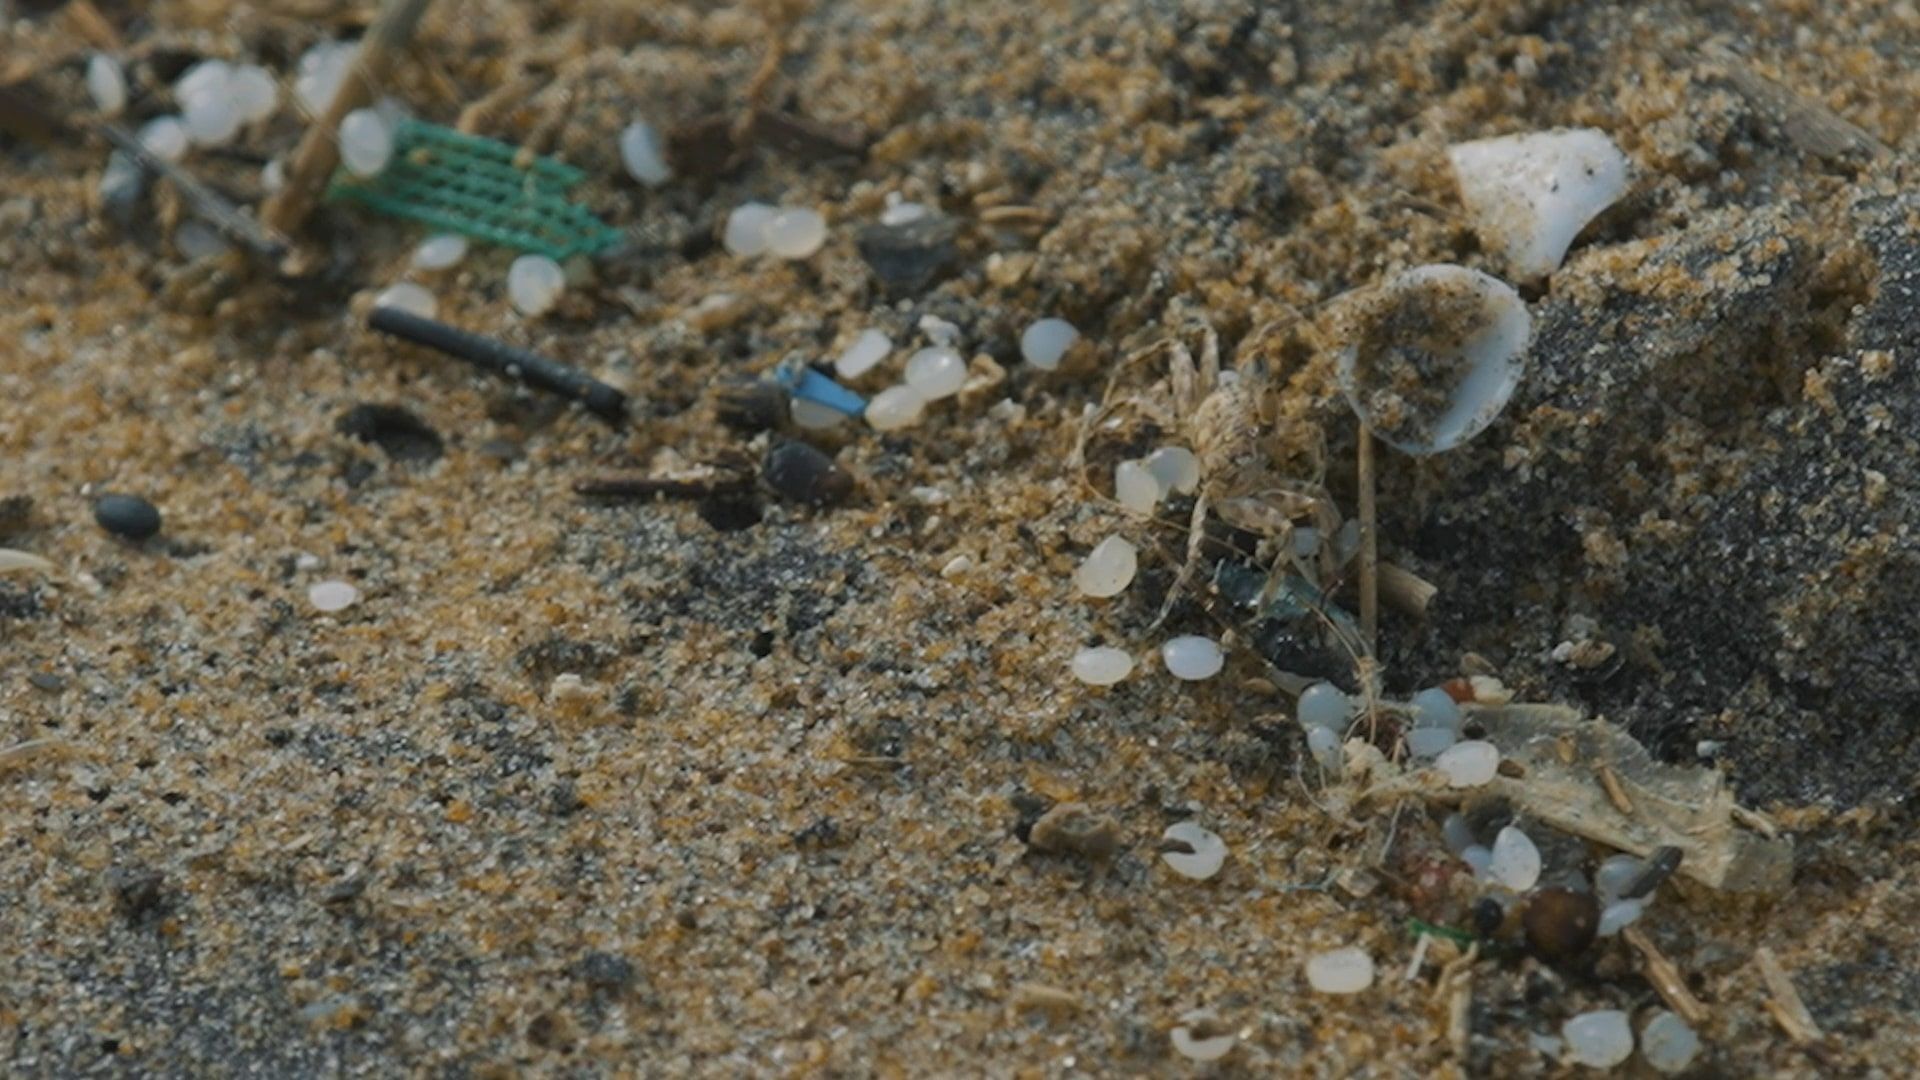 Plastic granules (nurdles) on the beach: Millimeter-sized beads that are difficult to pick up.